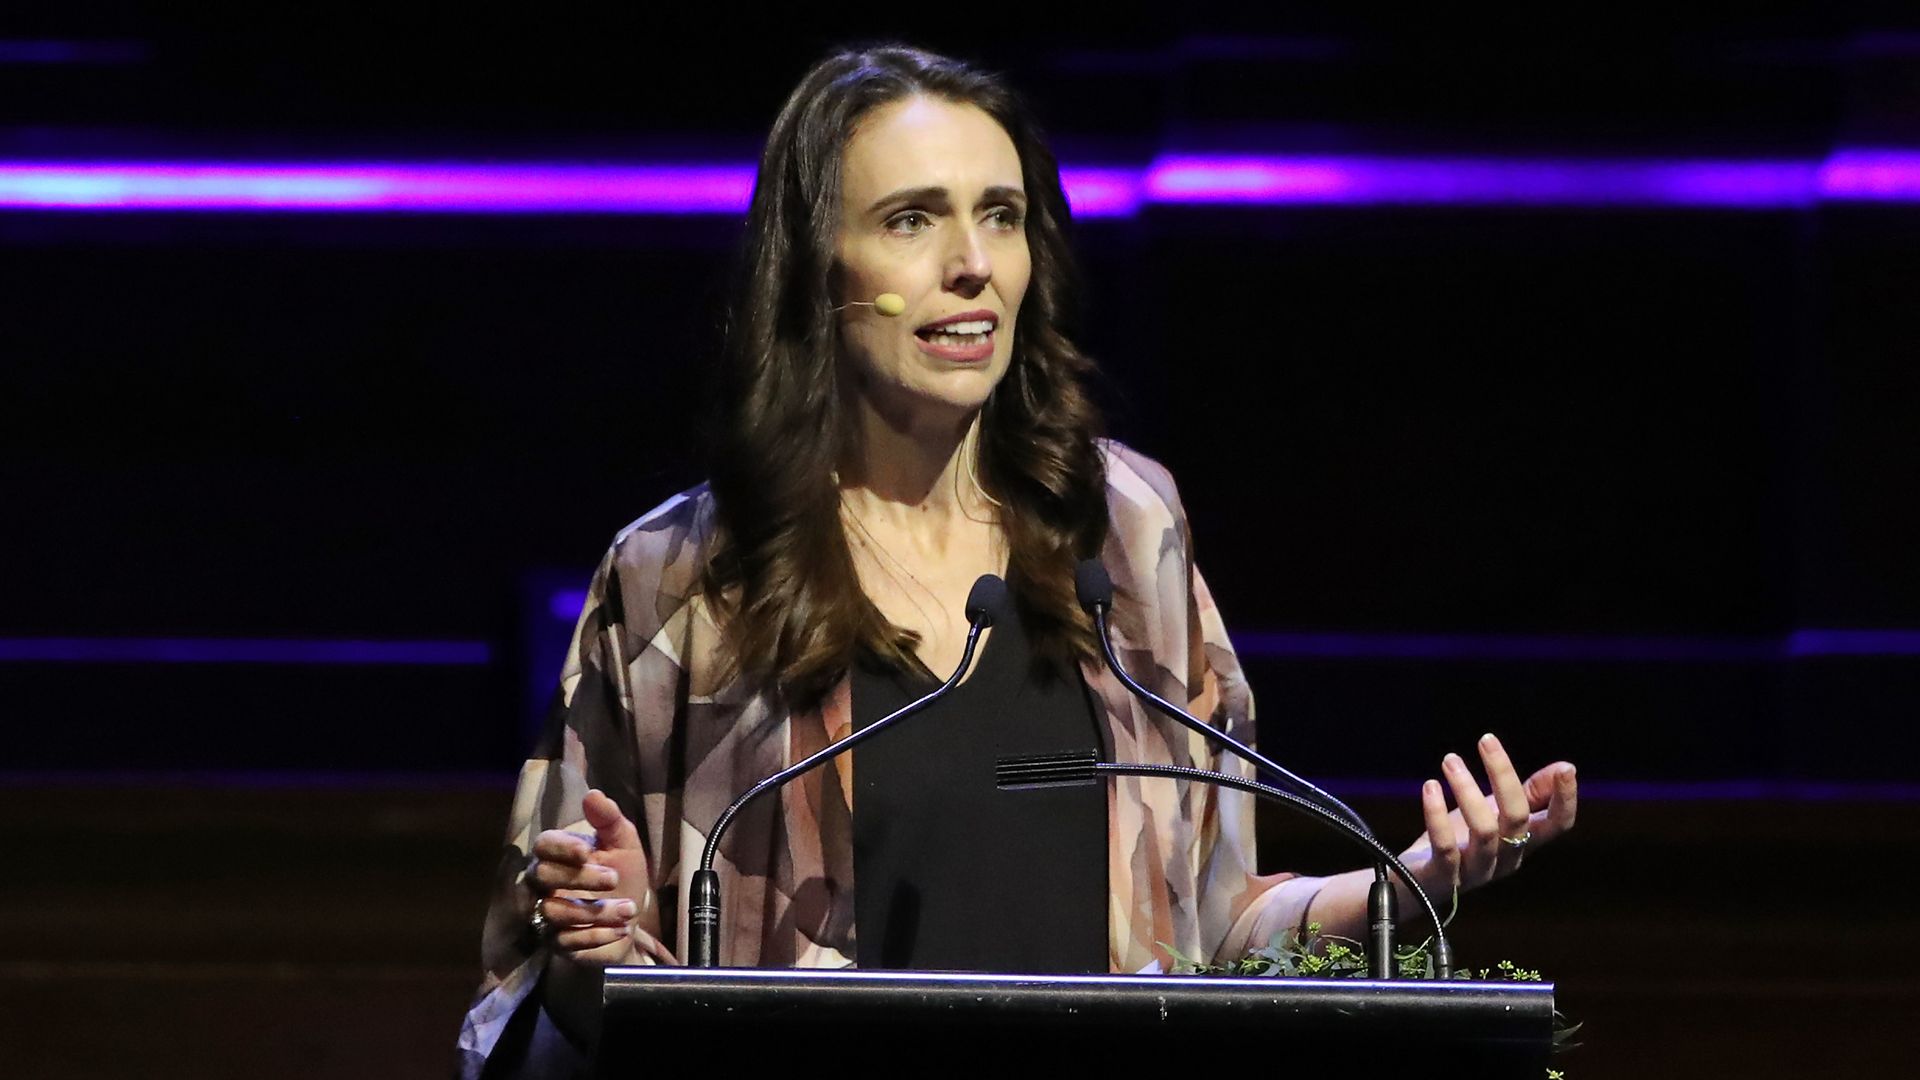 New Zealand Prime Minister Jacinda Ardern speaks at the Melbourne Town Hall on July 18.